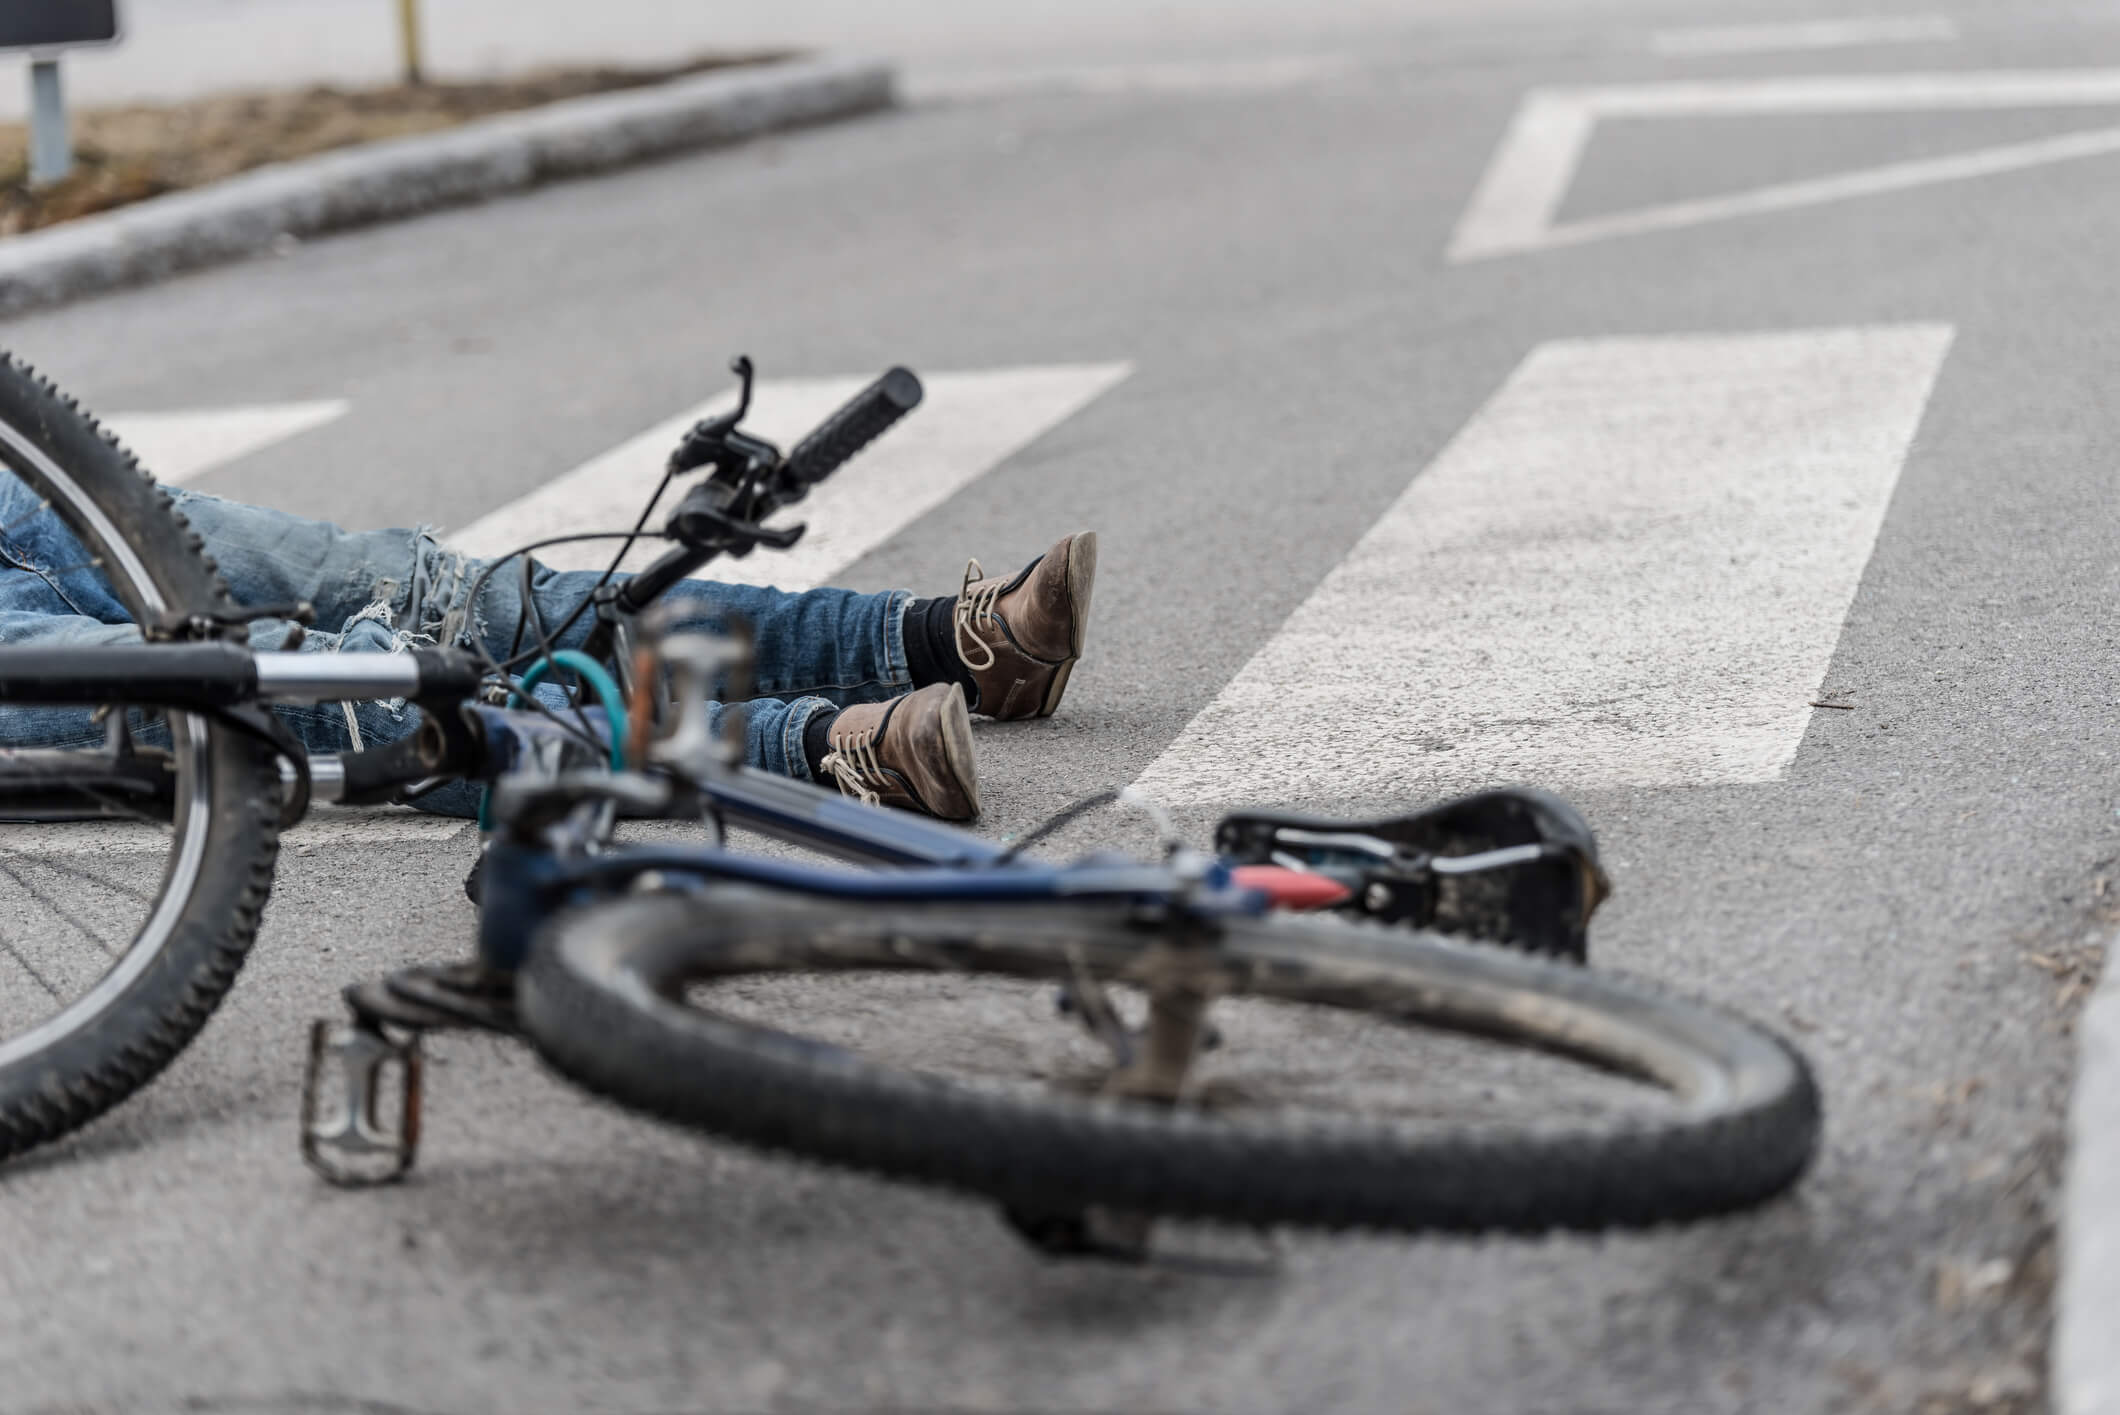 Oakland Bicycle Accident Law Firm